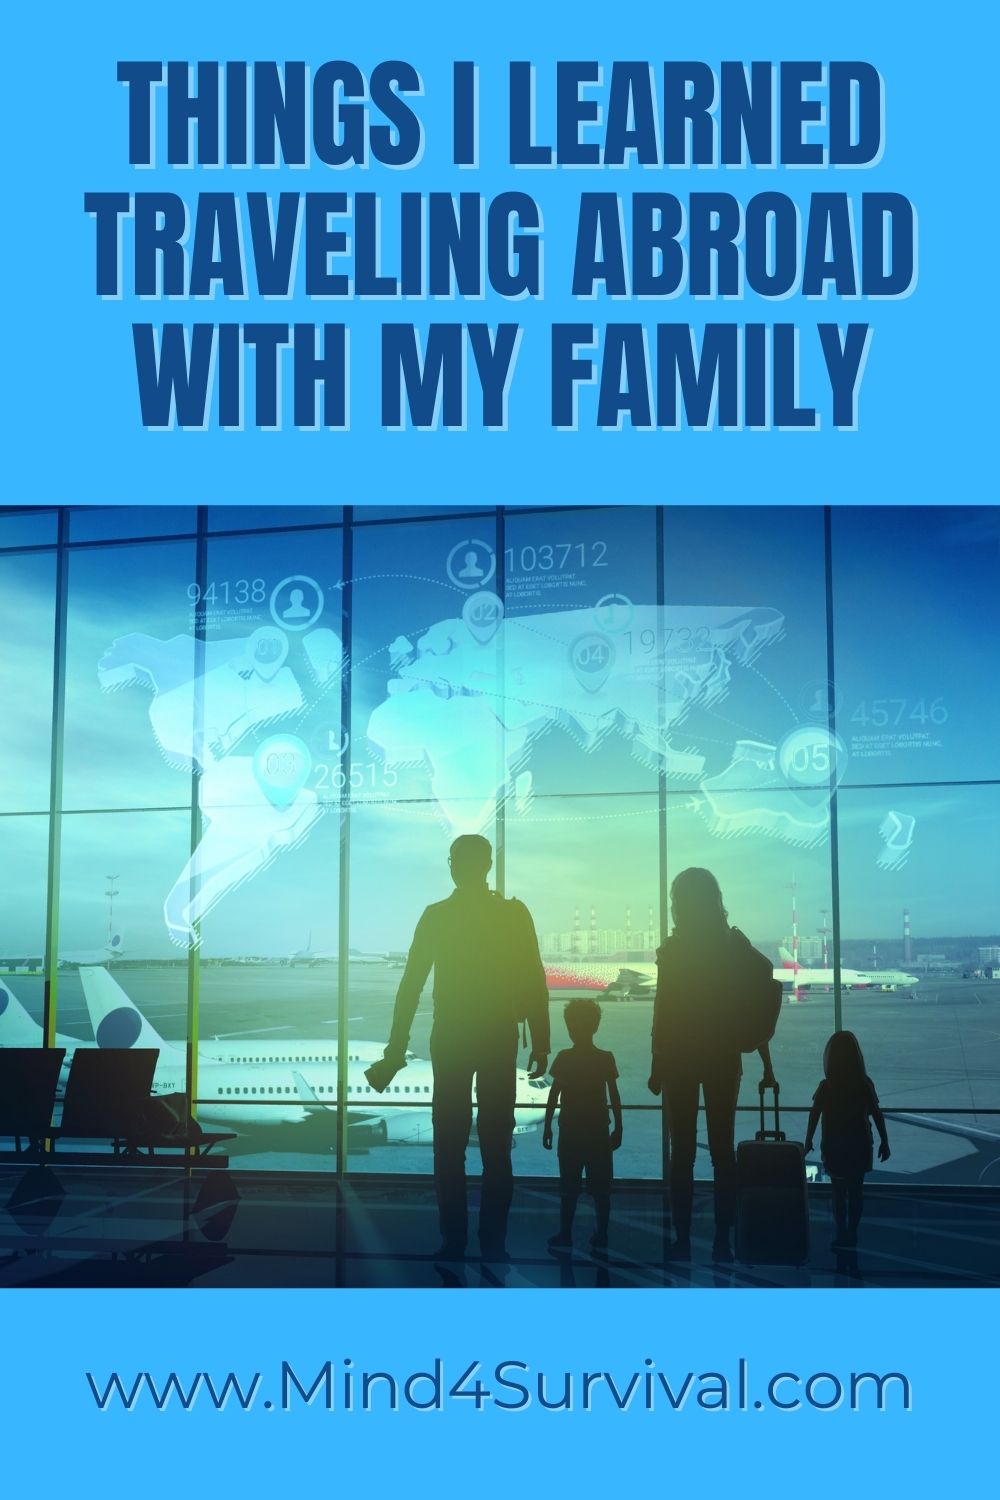 Things I Learned Traveling Abroad With My Family